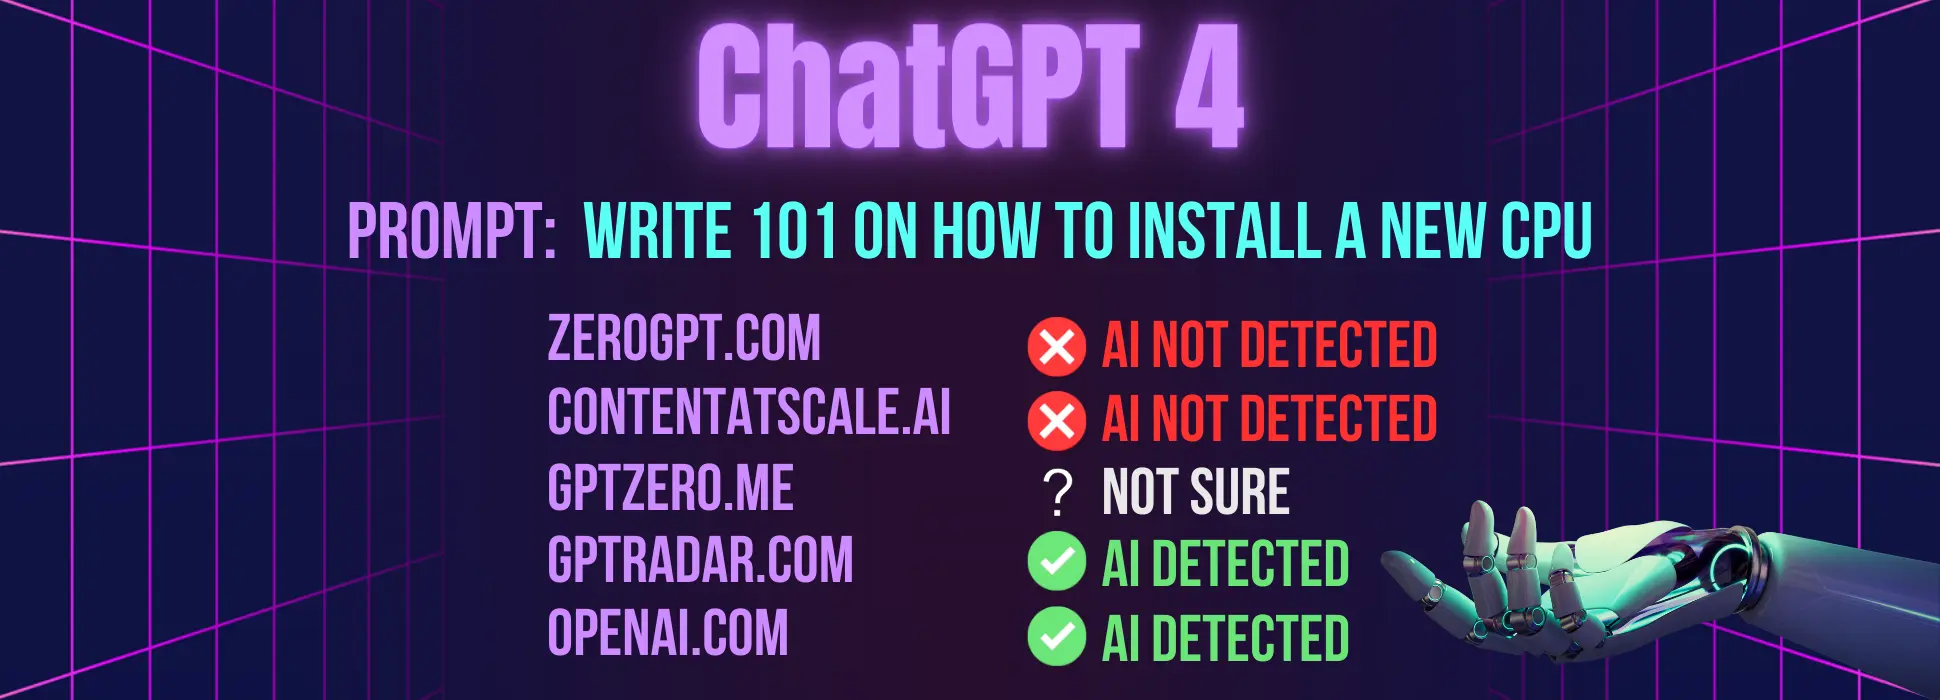 ChatGPT 4.0 results for prompt #3